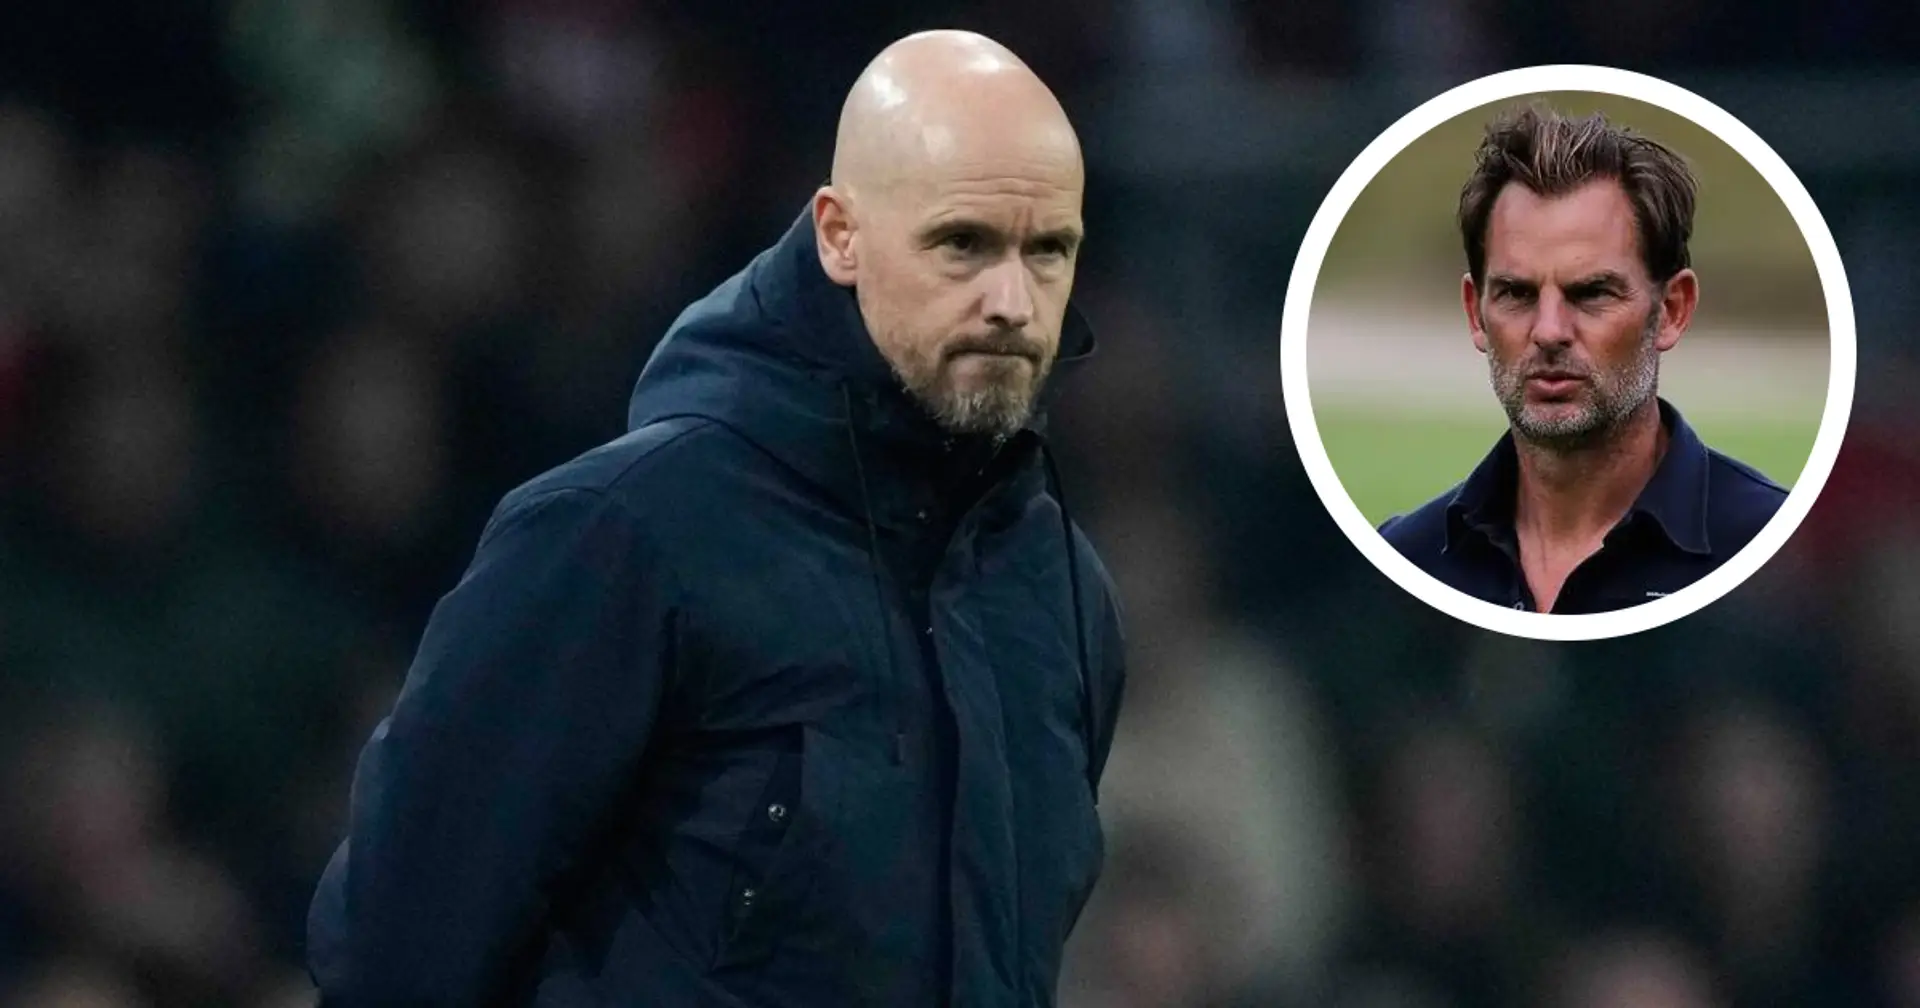 'He's capable enough and experienced enough': Ronald De Boer believes Ten Hag is ready for Man United